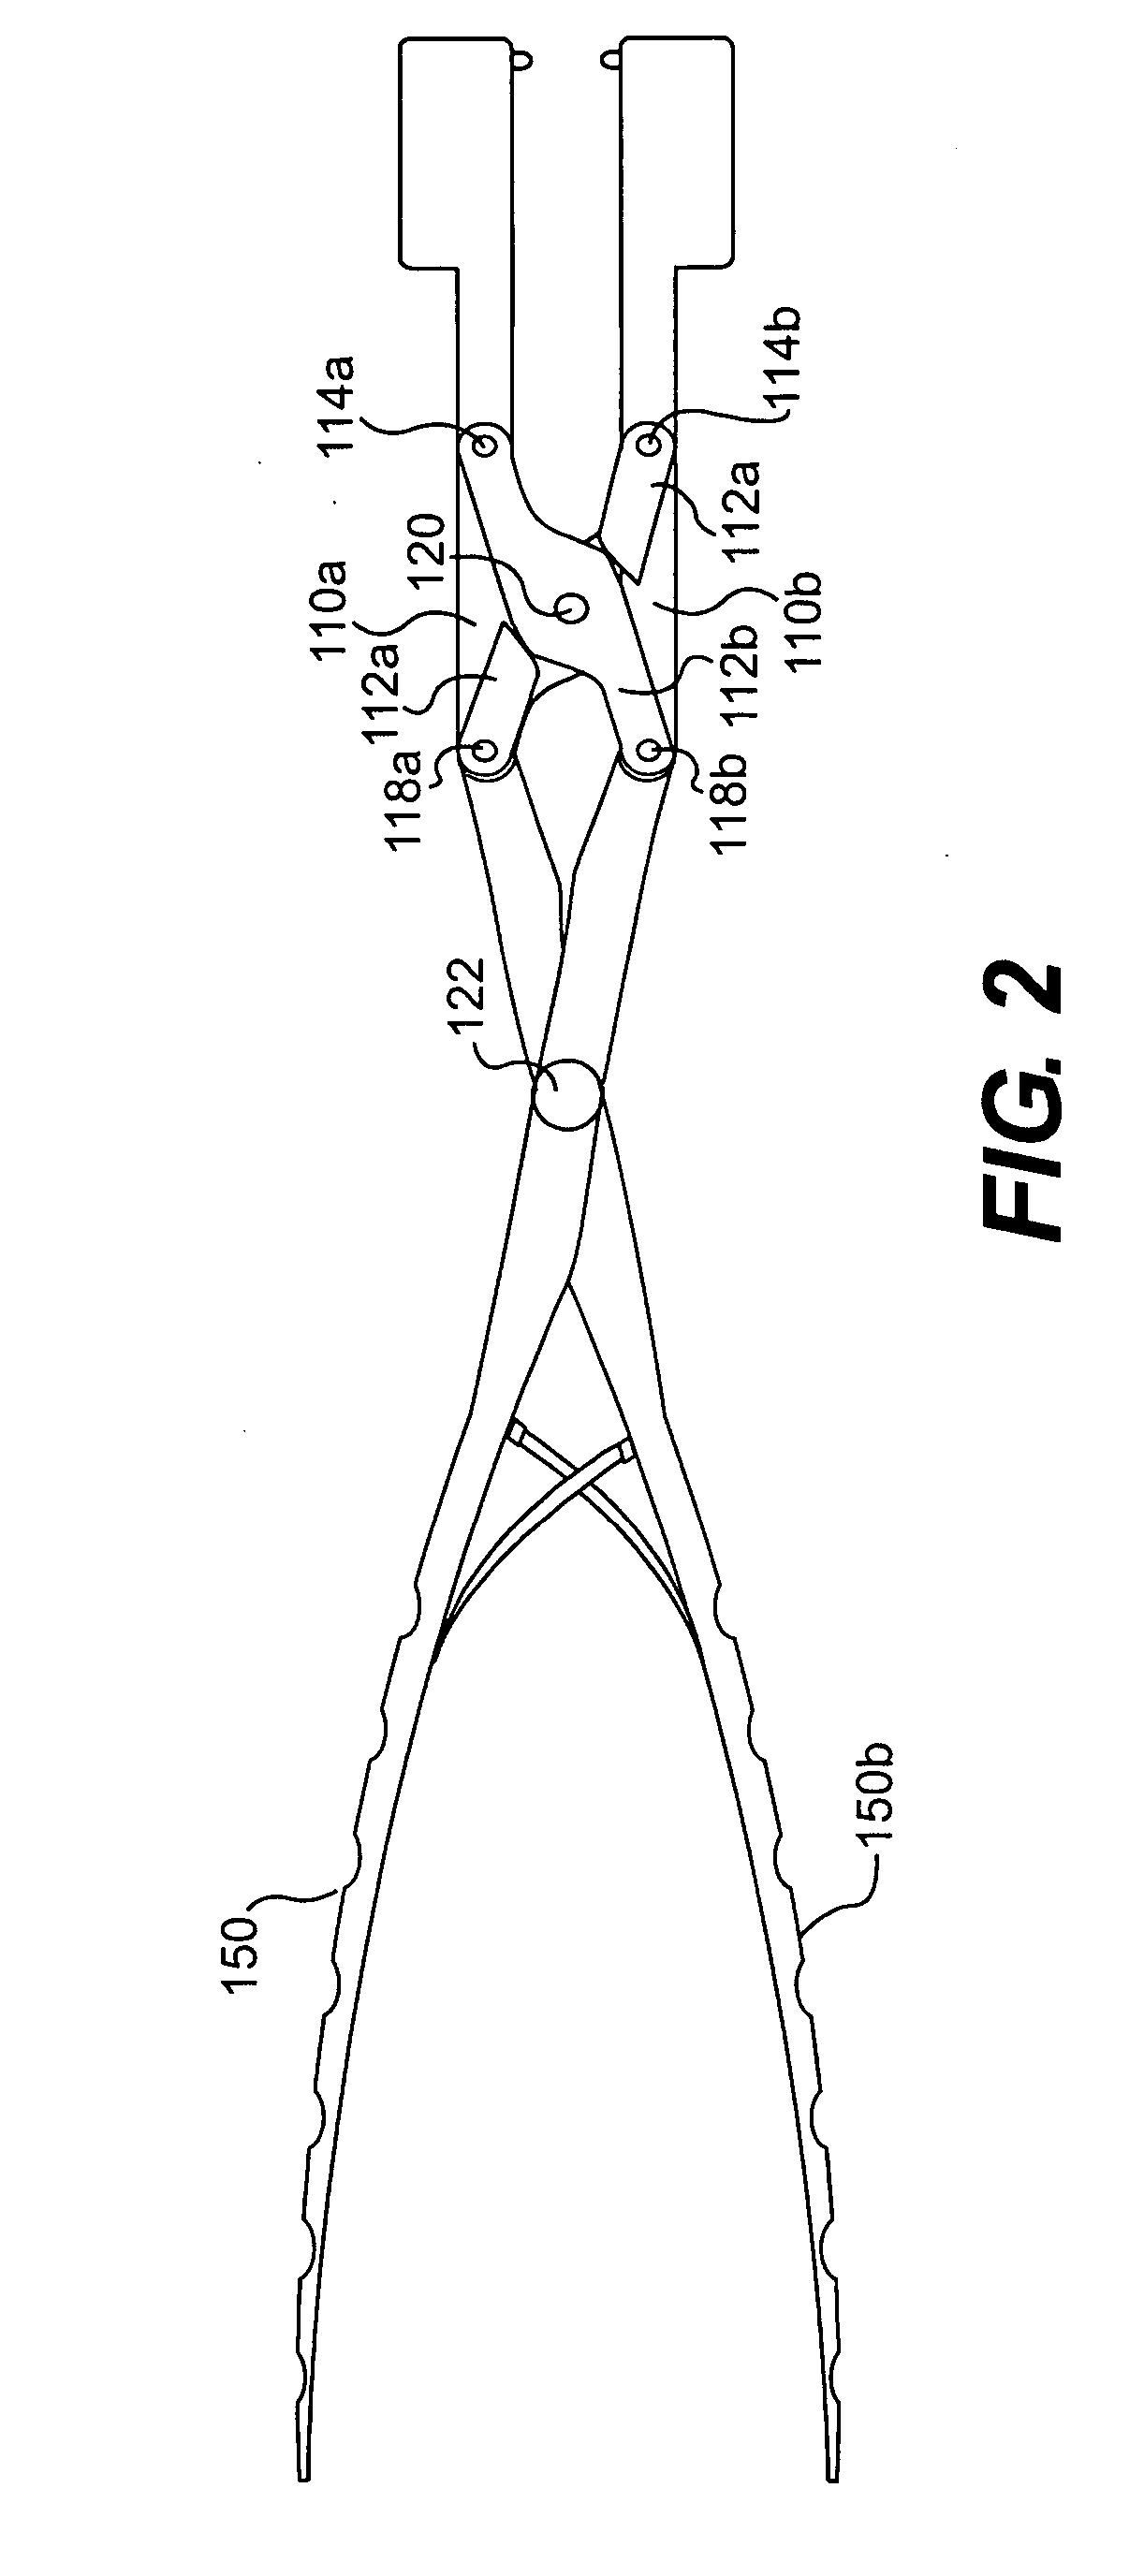 Compression device and method for shape memory alloy implants